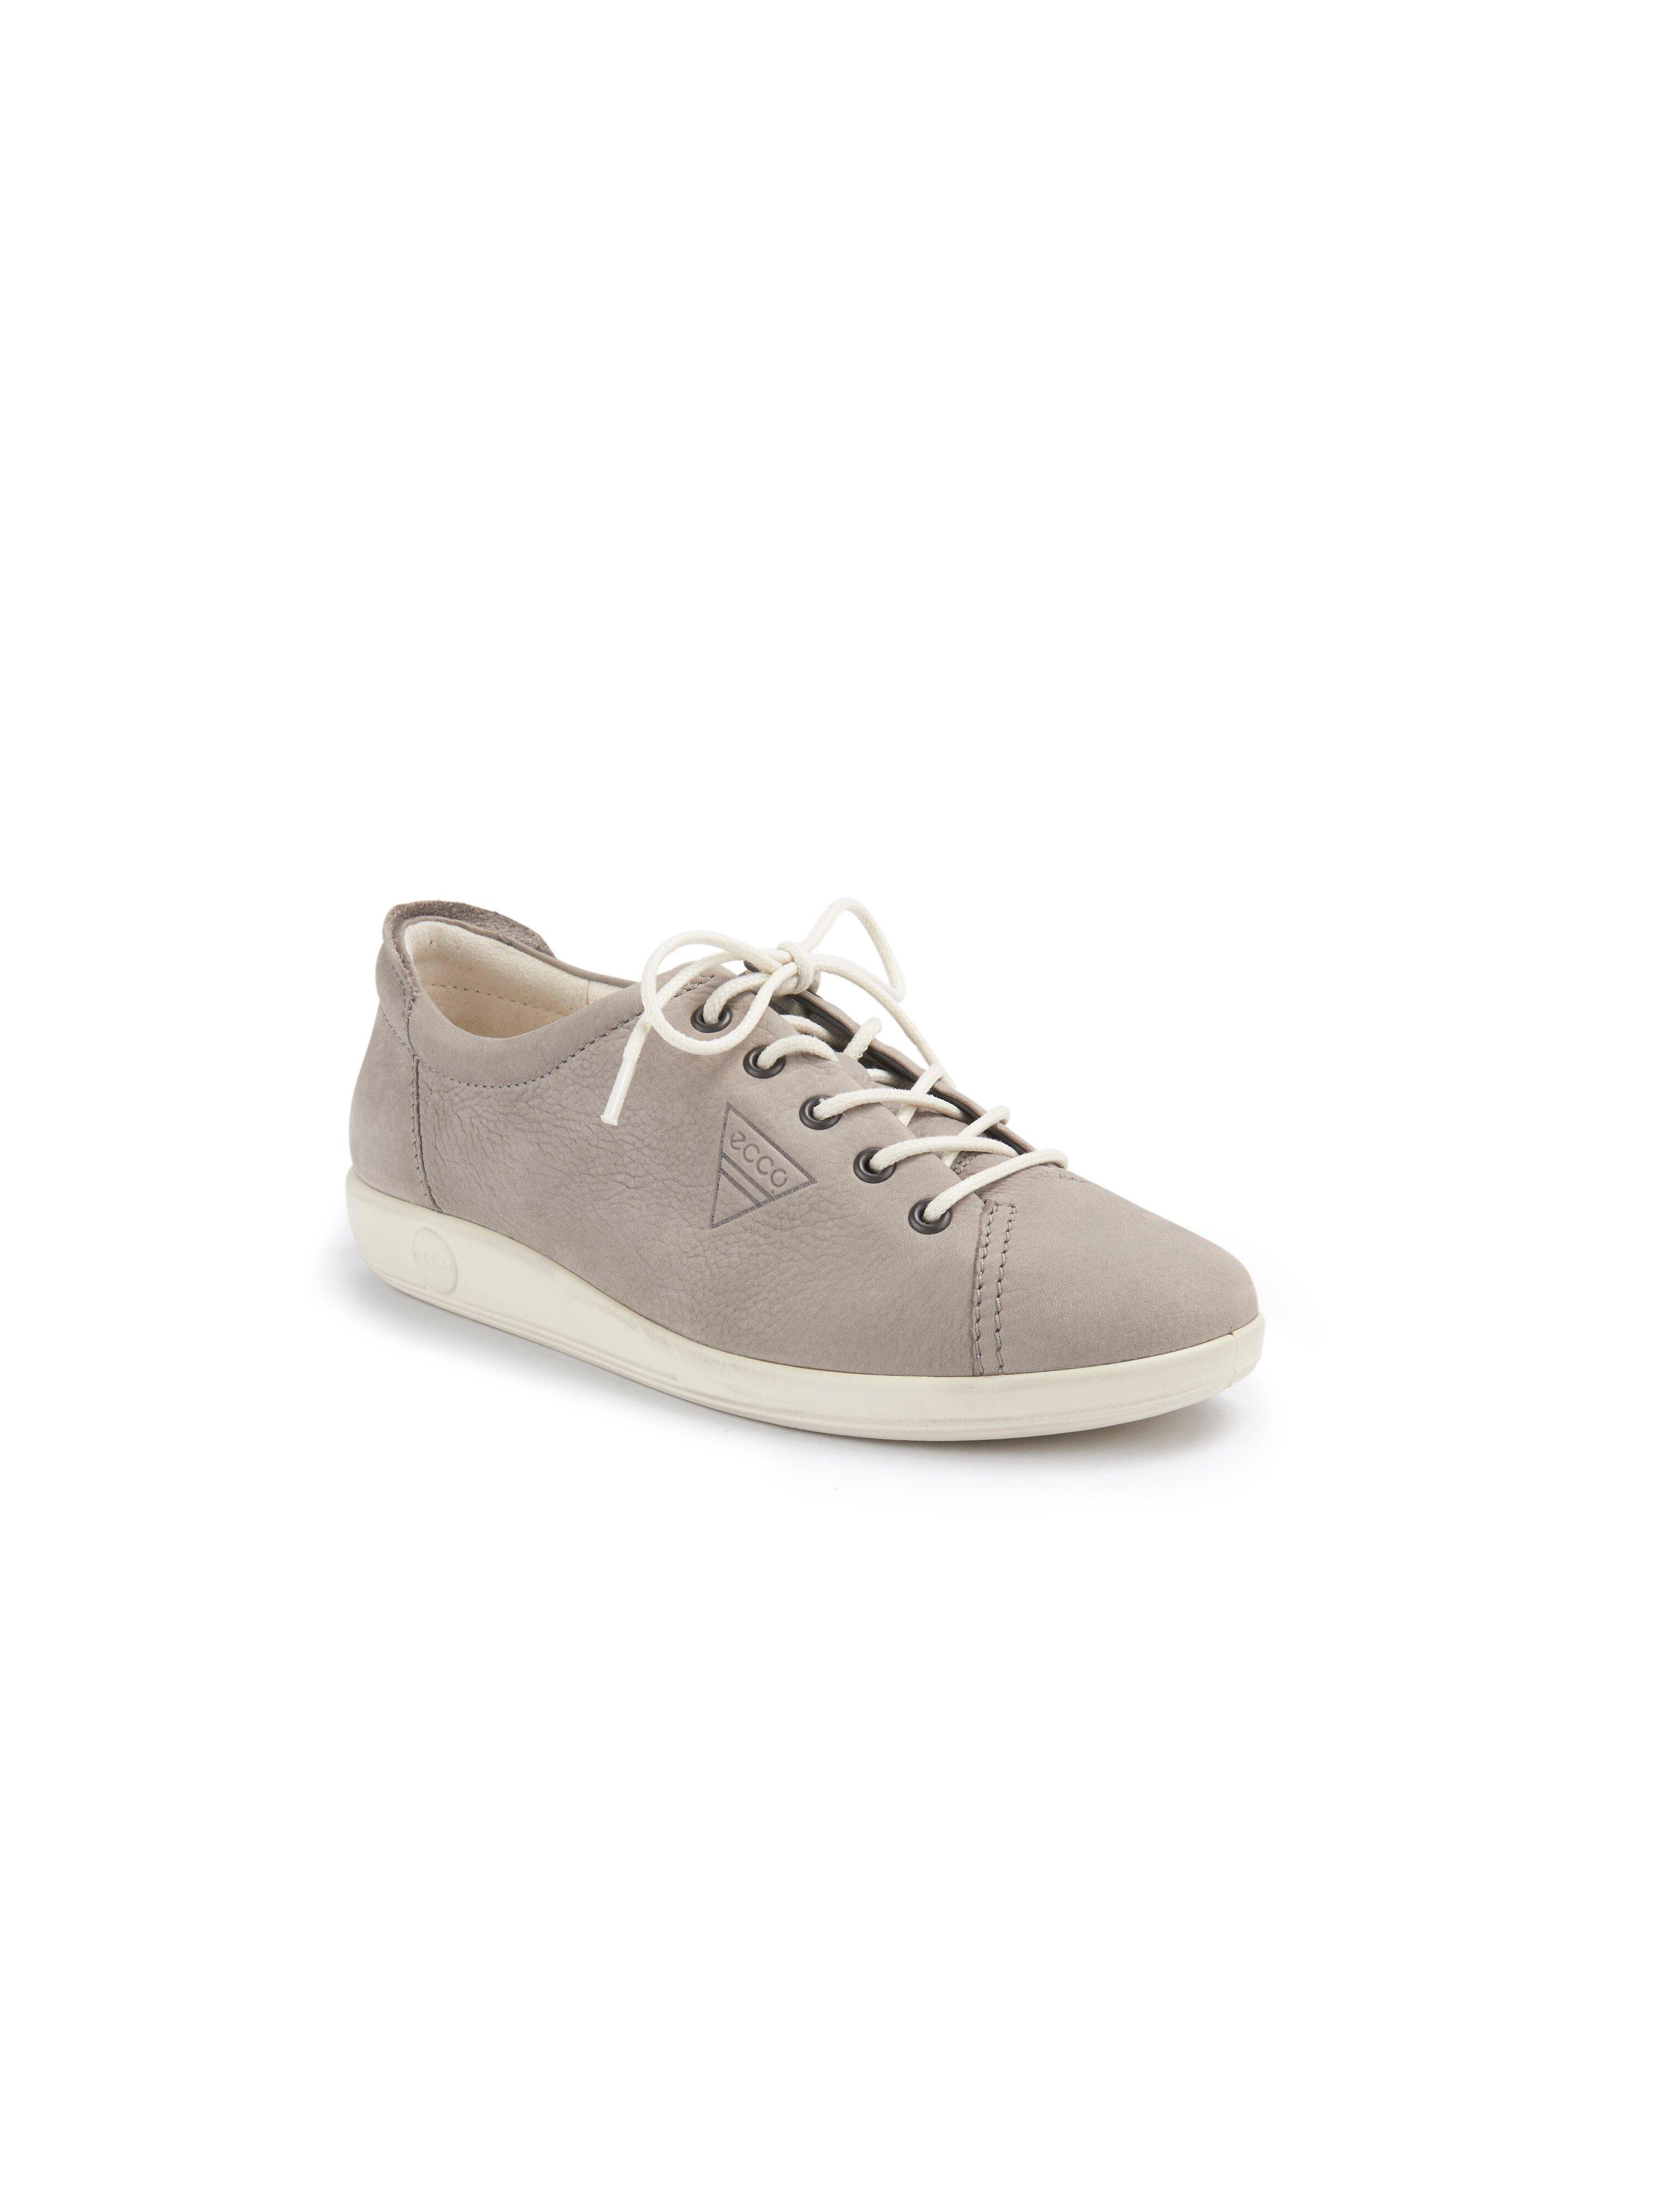 Ecco - Sneakers Soft 3 - taupe